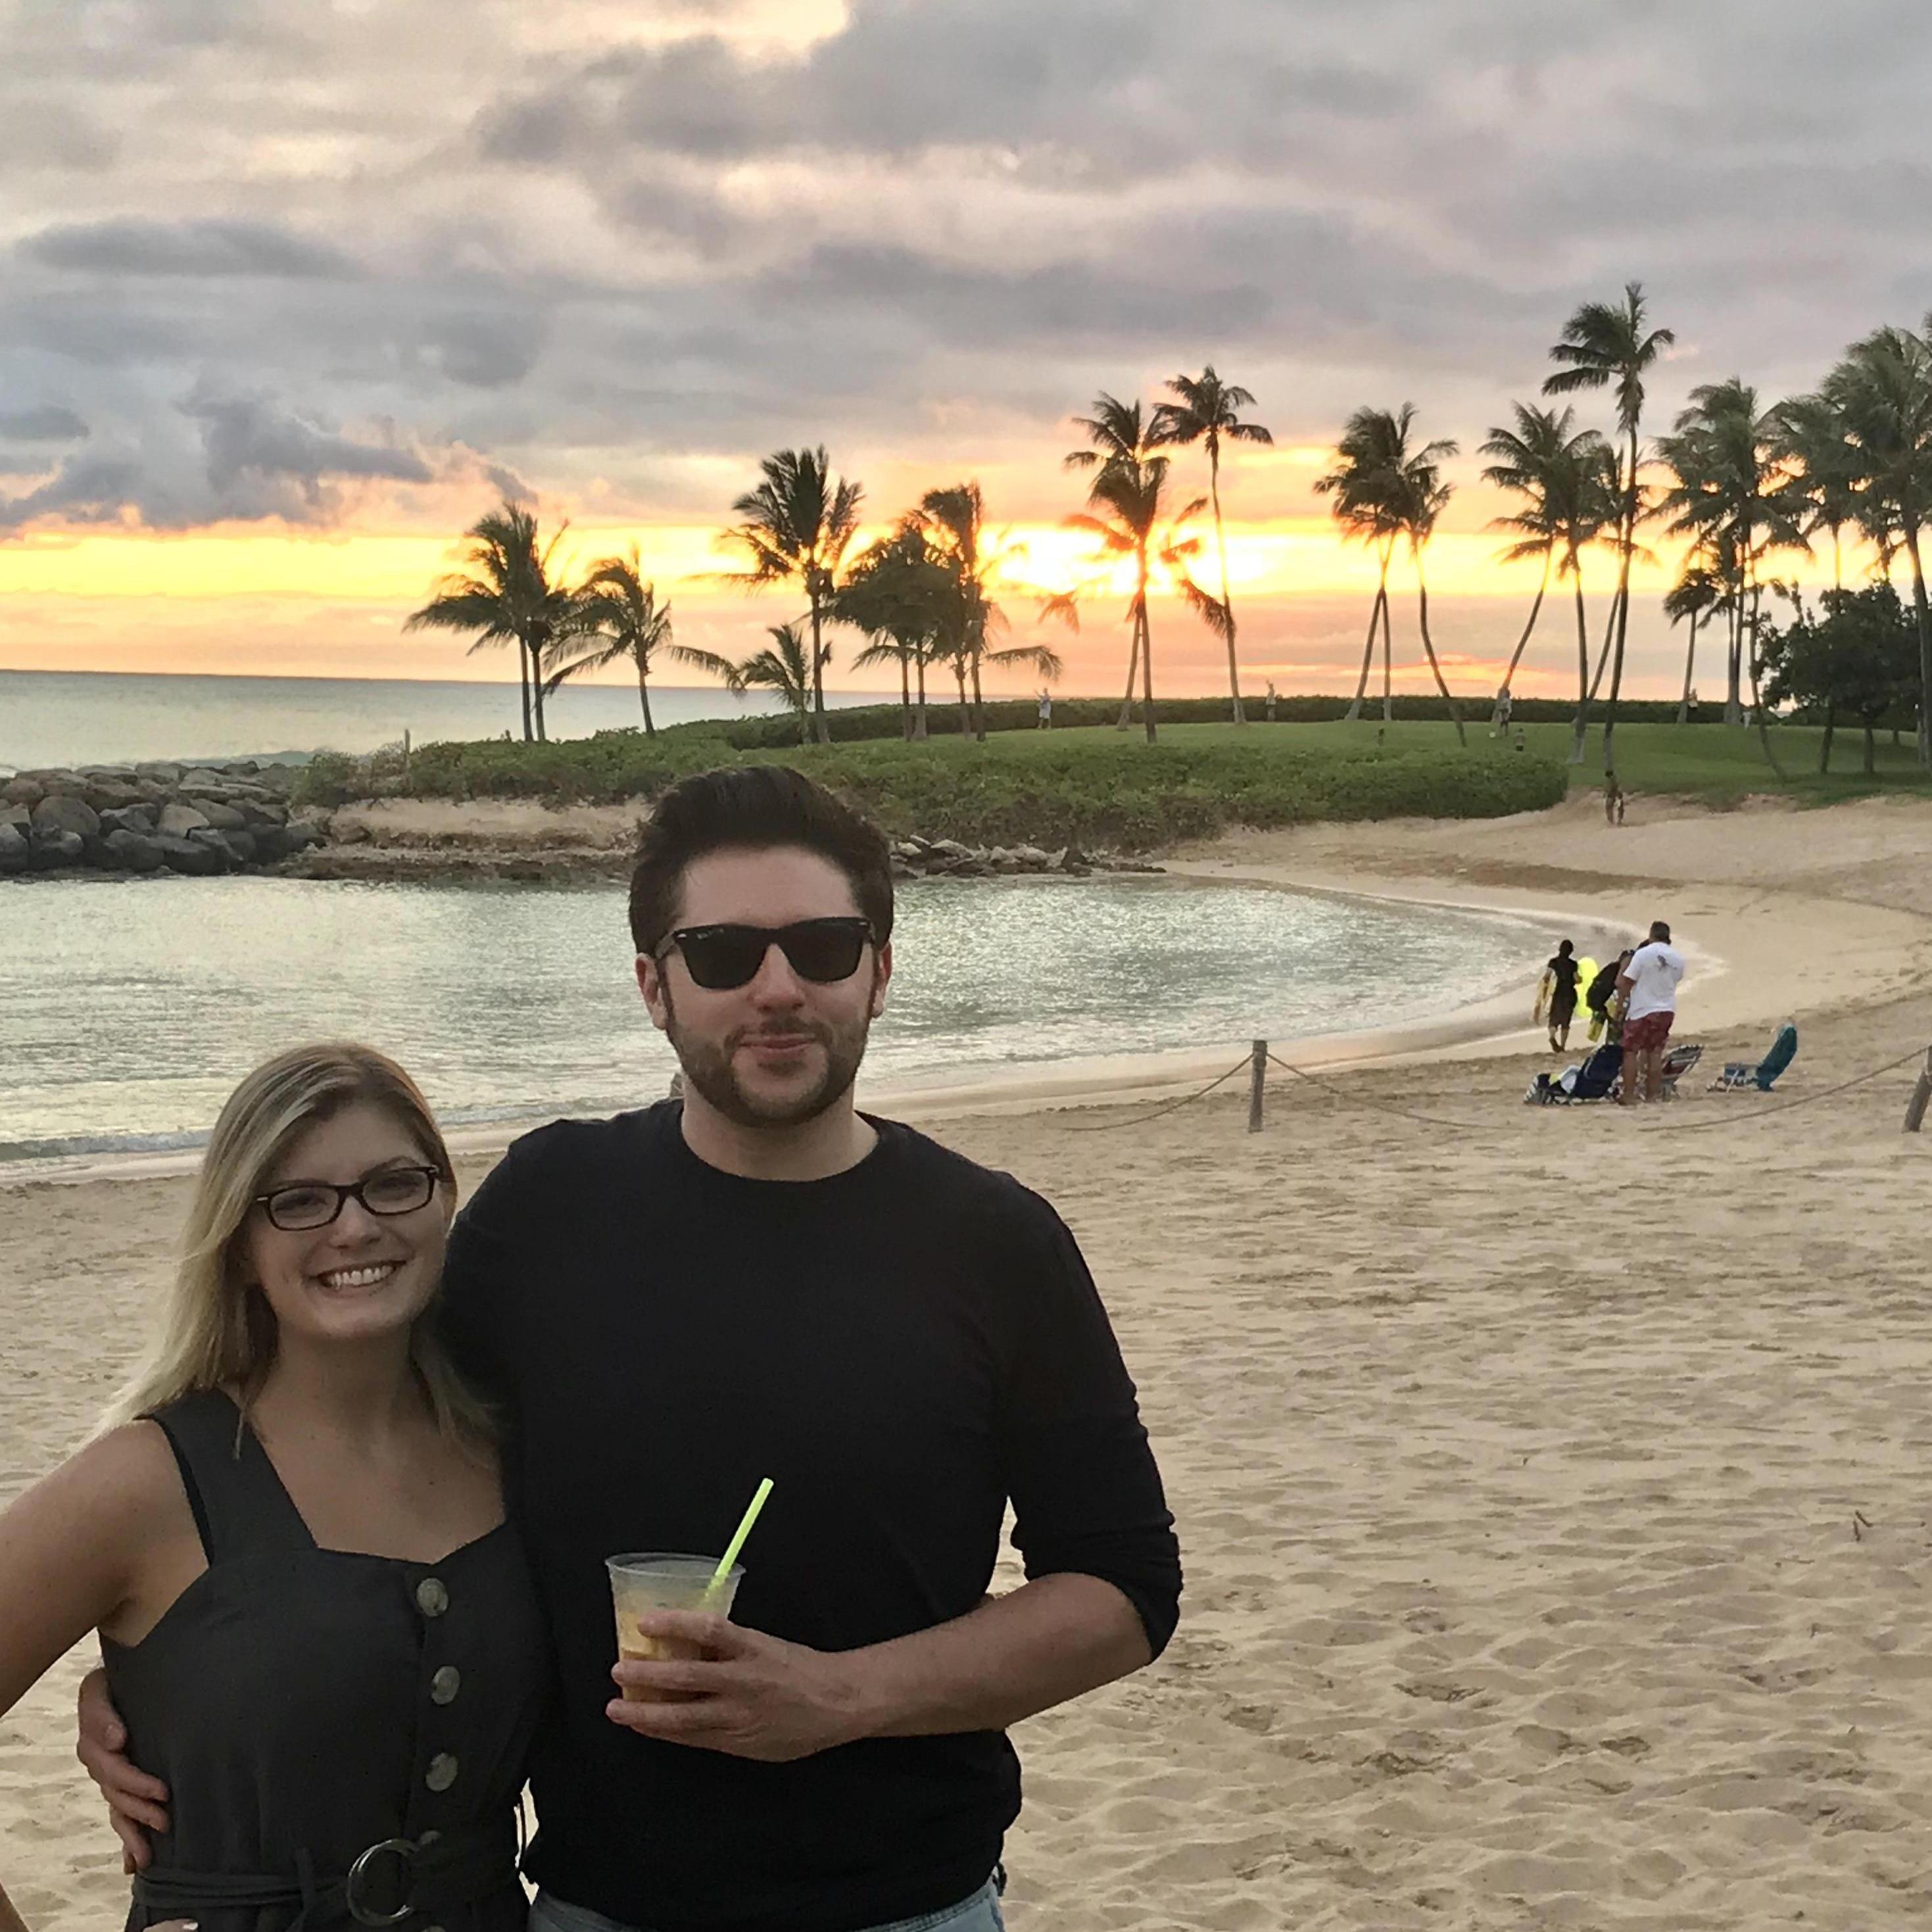 Sunsets and piña coladas at the lagoon in Oahu, Hawaii
2018